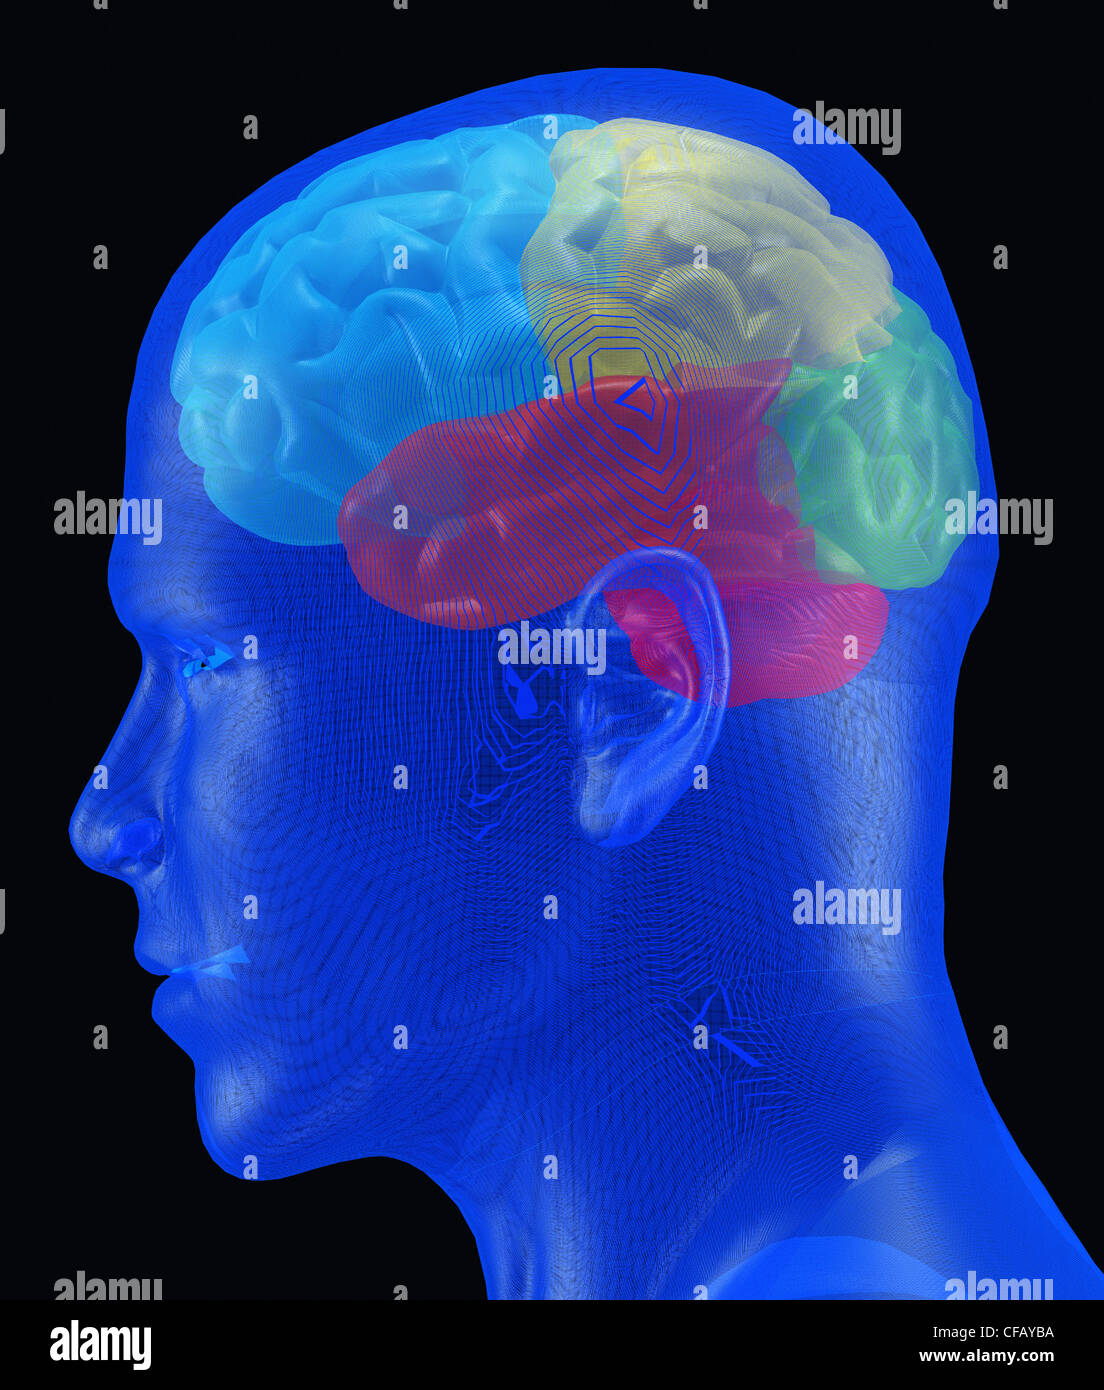 Brain. A human brain of different color under a transparent mesh cover Stock Photo